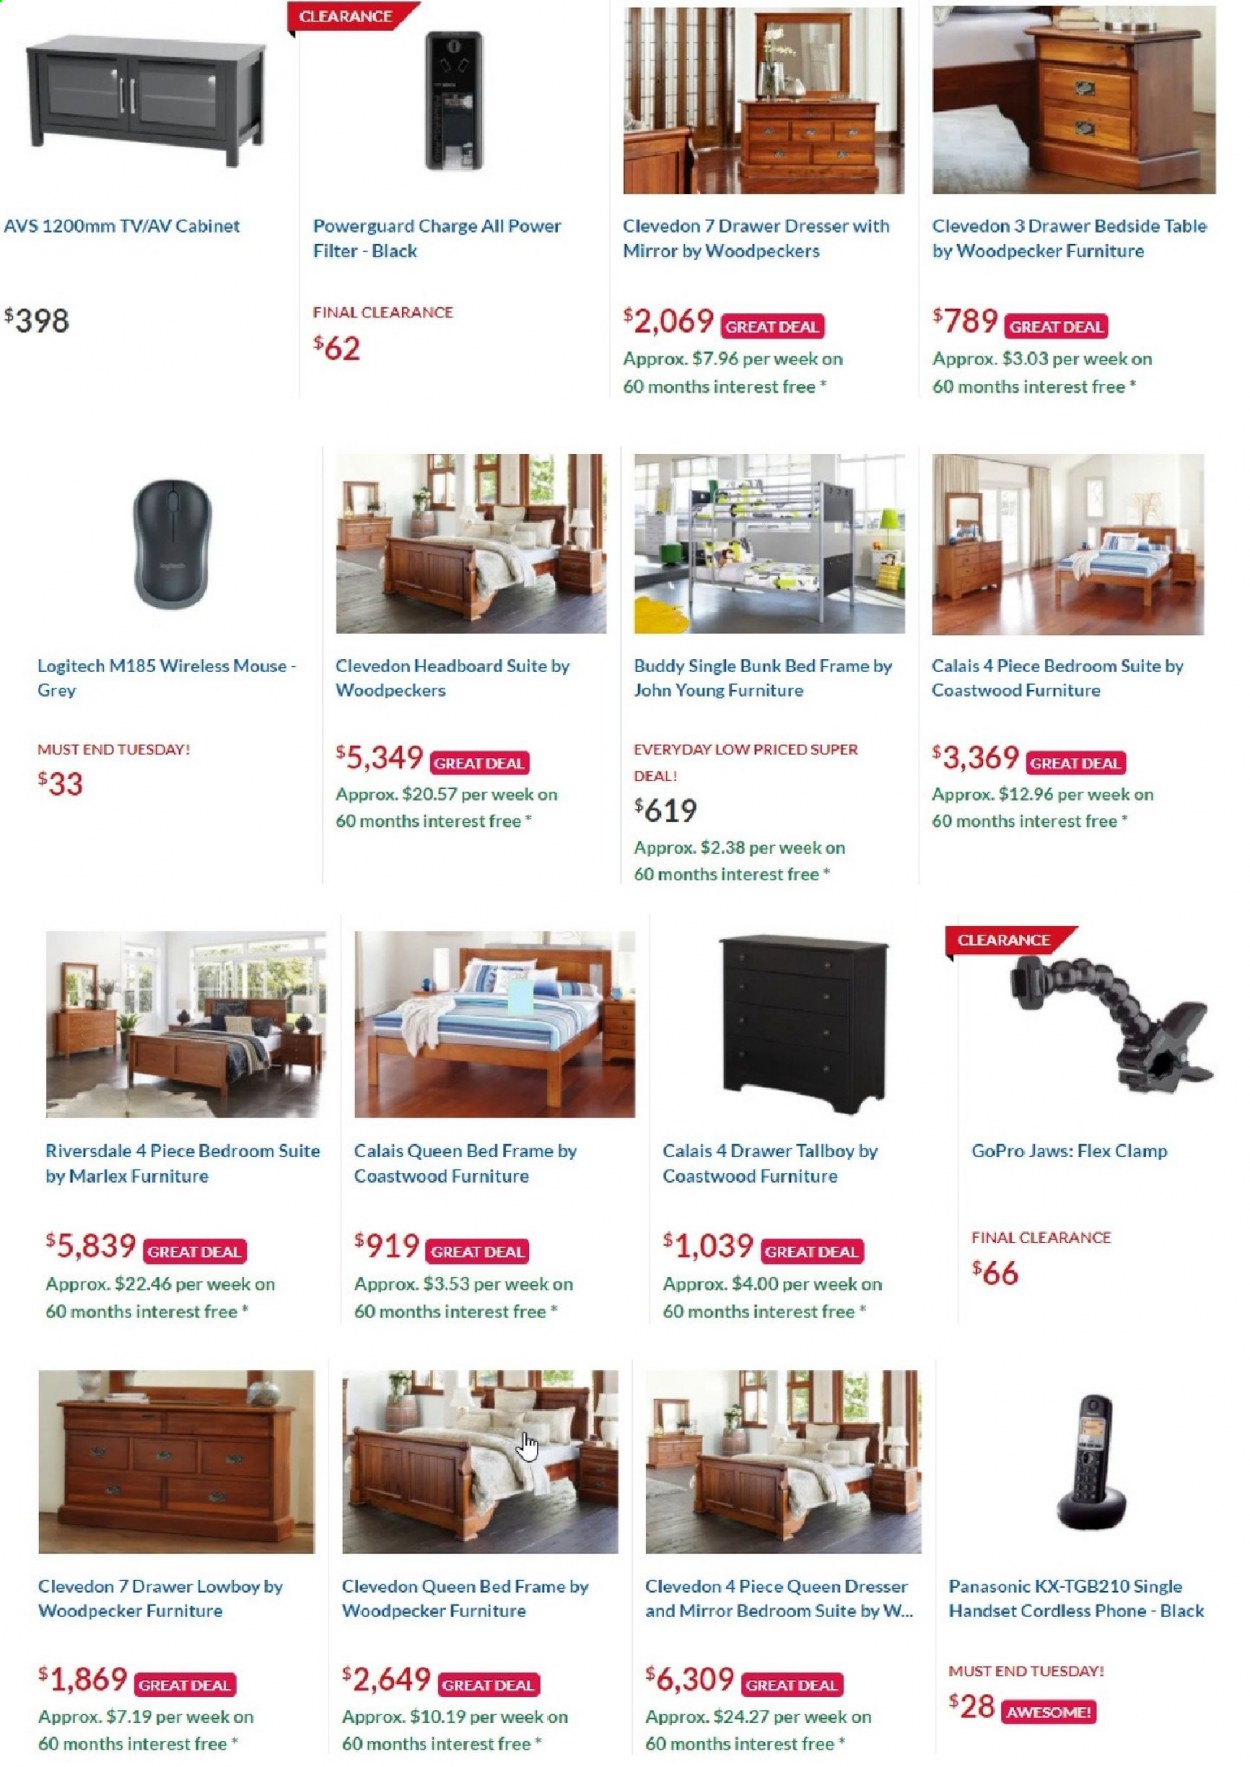 thumbnail - Harvey Norman mailer - Sales products - cabinet, table, bedroom suite, queen bed, bed, headboard, bed frame, dresser, bedside table, mirror, Panasonic, phone, Logitech, mouse, GoPro, TV. Page 2.